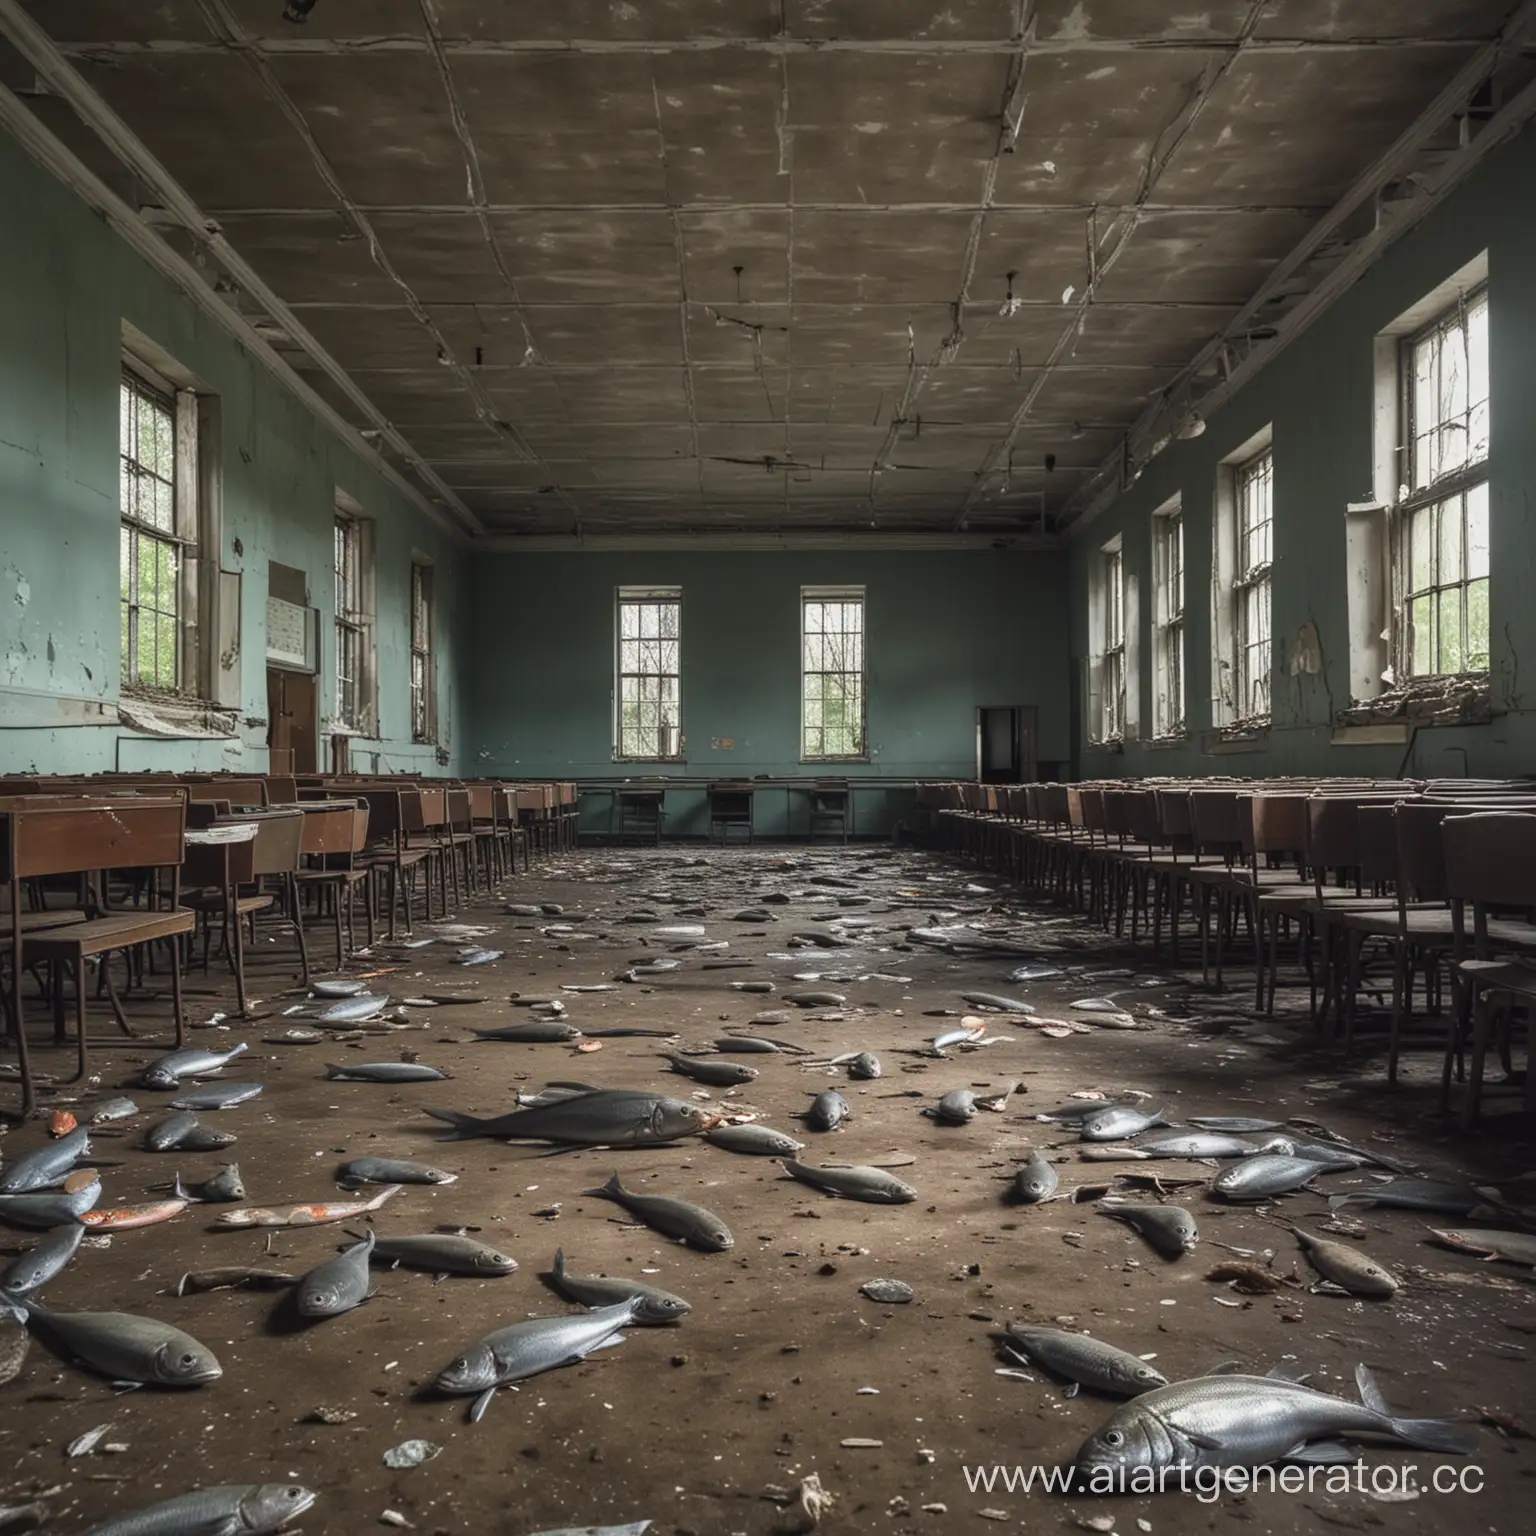 Exploring-an-Abandoned-School-with-a-Giant-Fish-and-Children